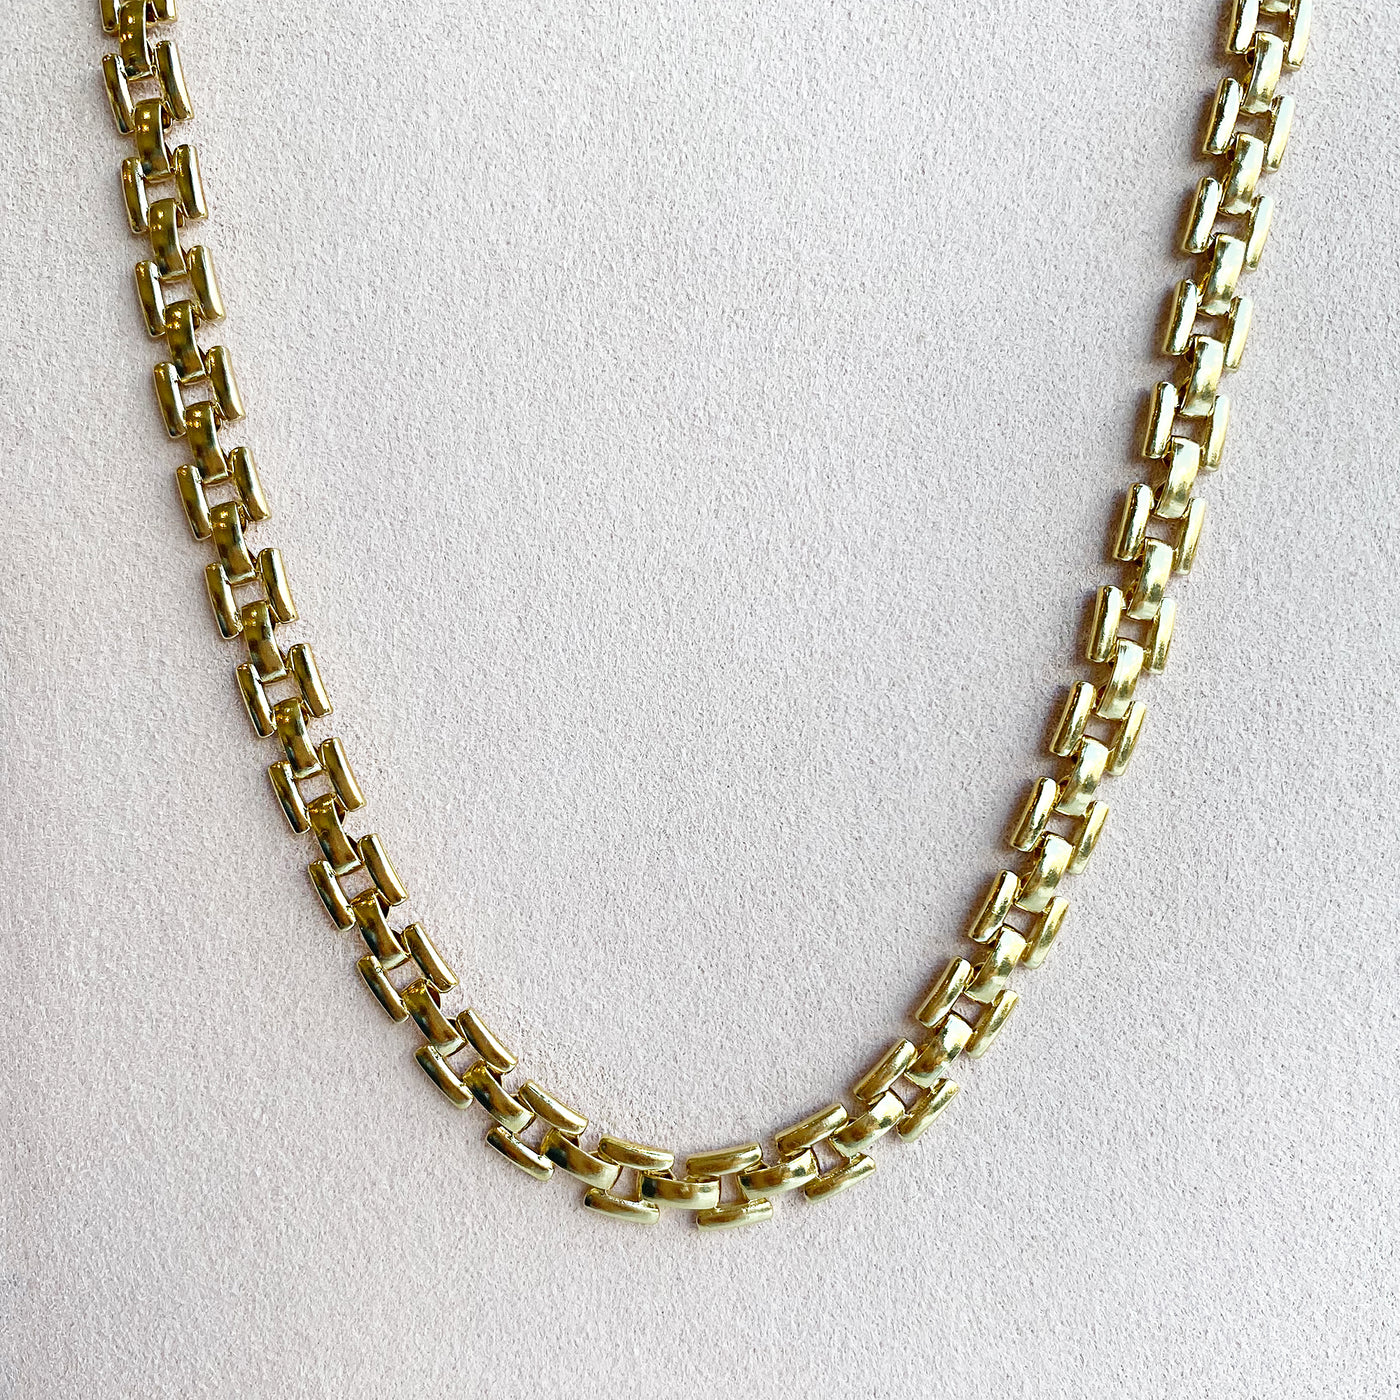 Leah Alexandra Gold Panther Chain Necklace